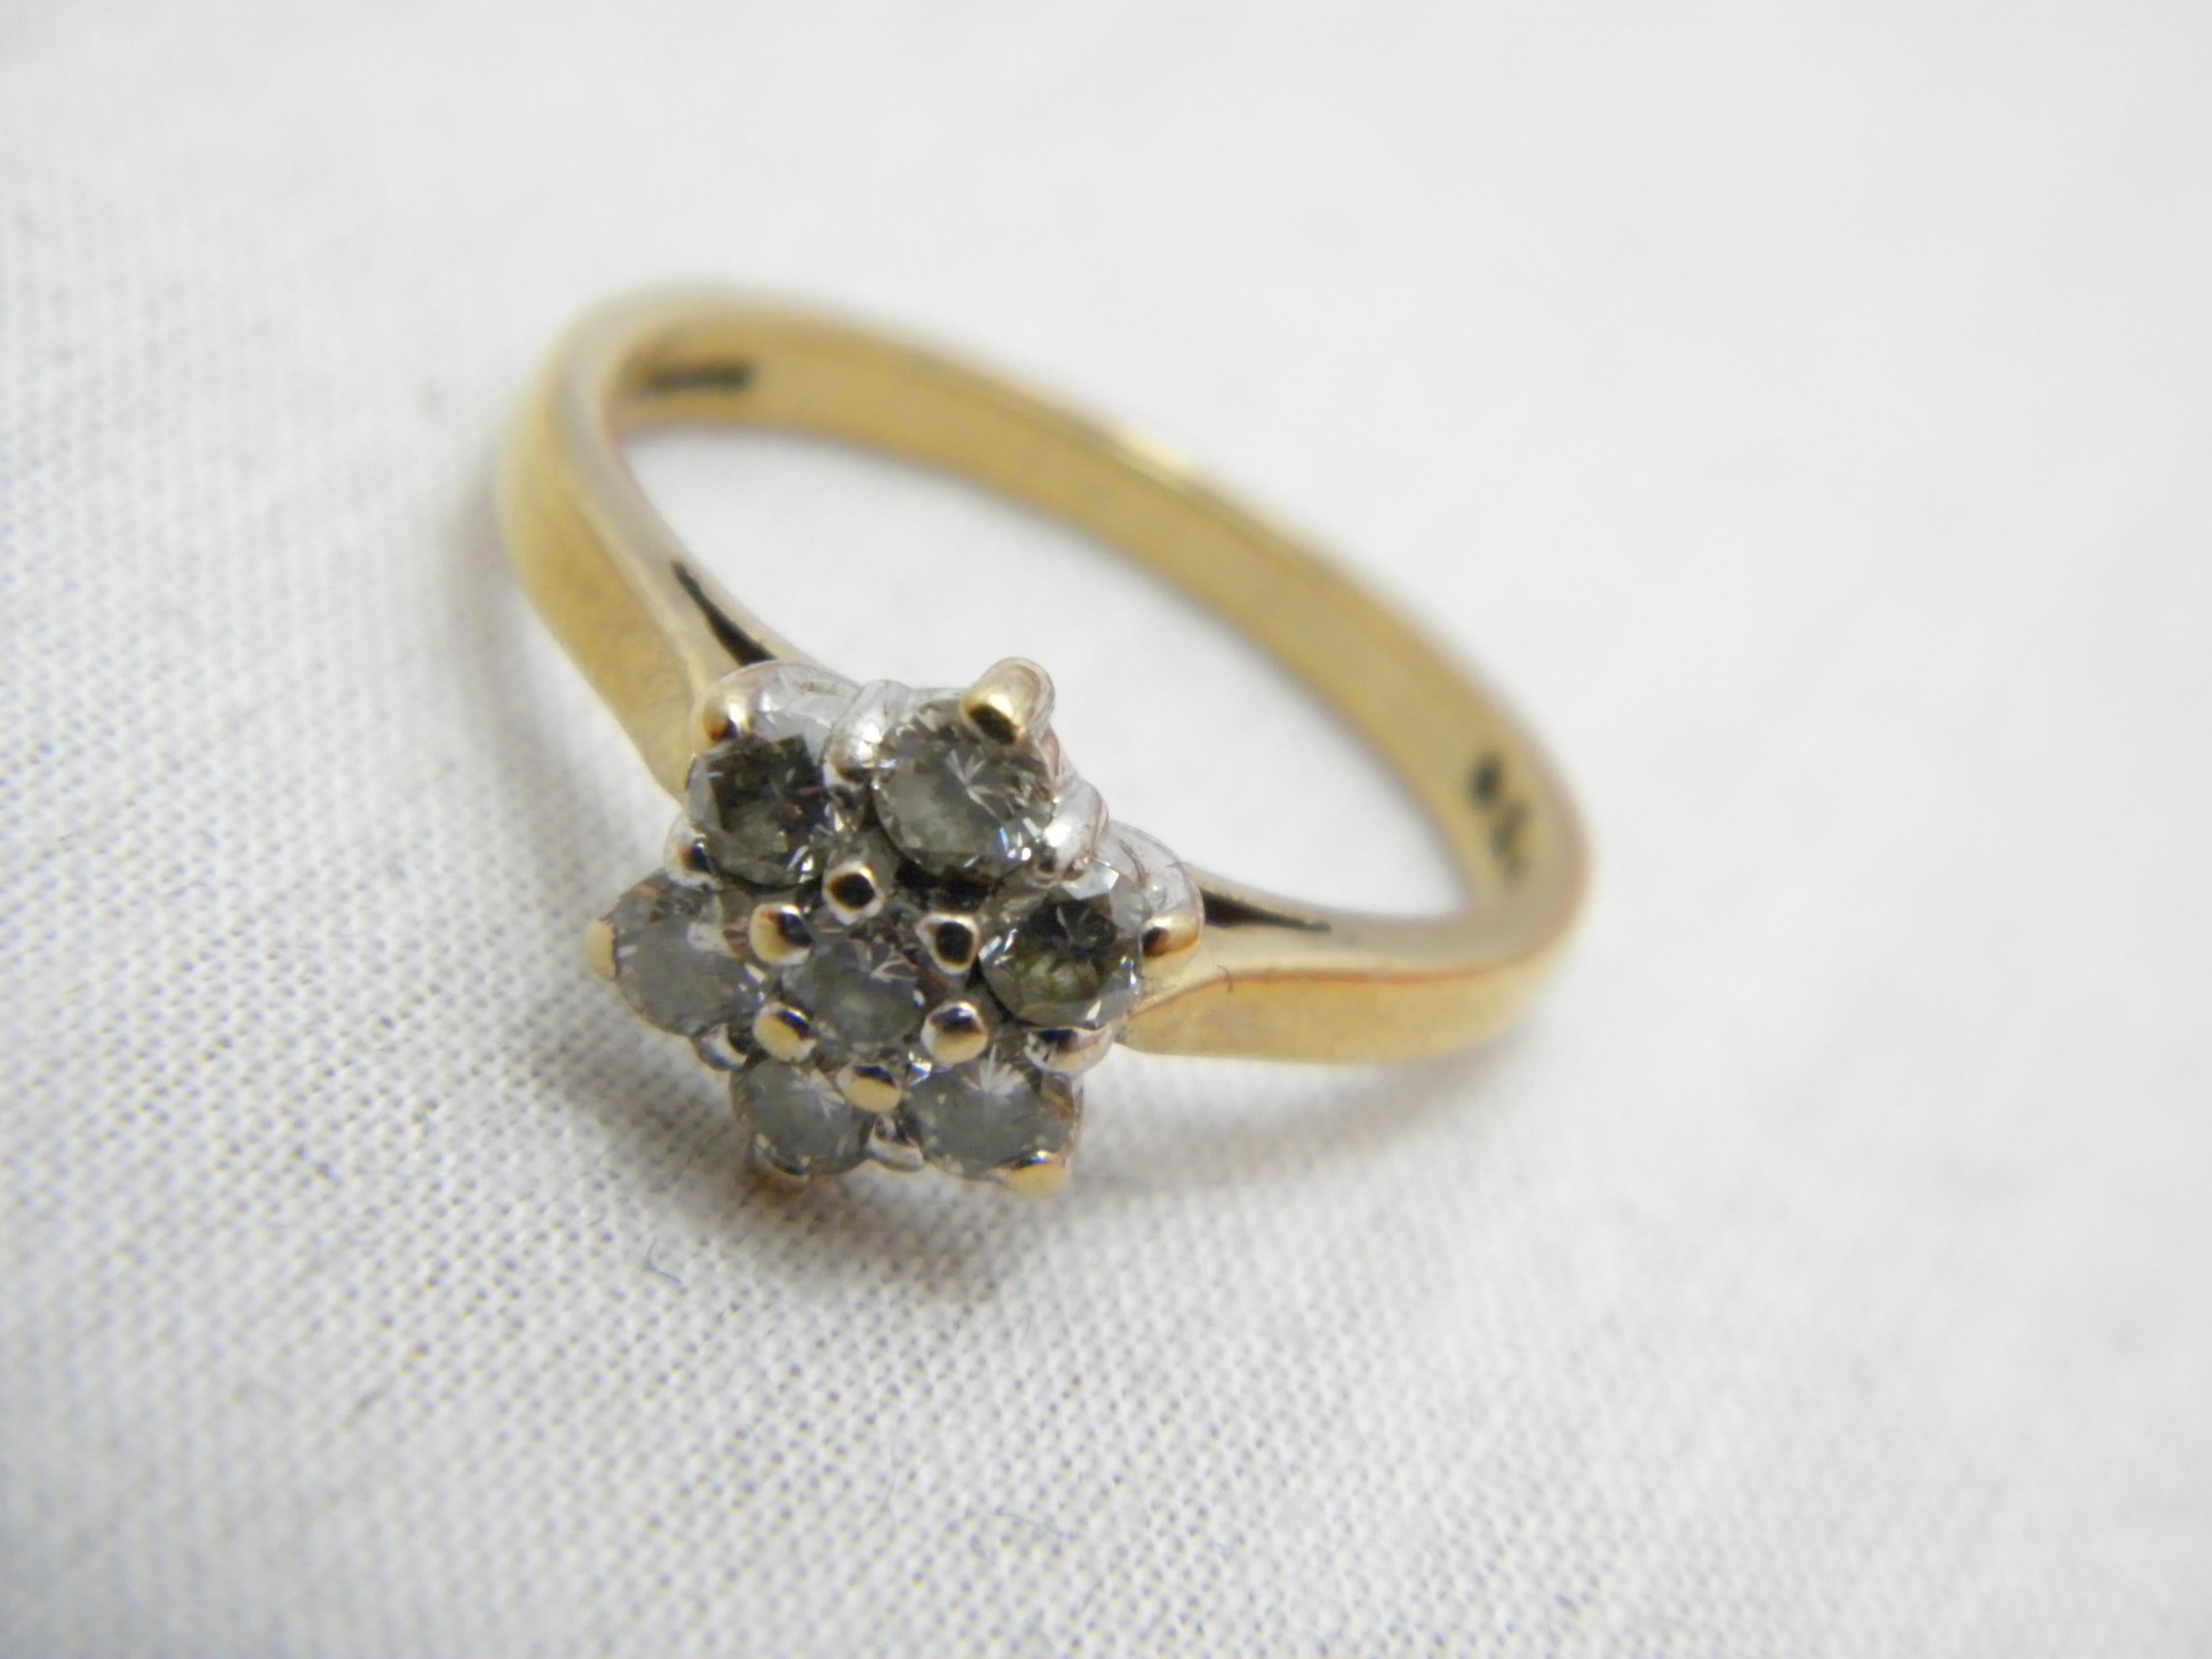 If you have landed on this page then you have an eye for beauty.

DETAILS
Material: 9ct 375/000 Yellow Gold
This ring has a sturdy shank hence ideal if resizing needed
Gemstones: 7 x Round Brilliant cut ice white diamonds in daisy cluster.
All gems